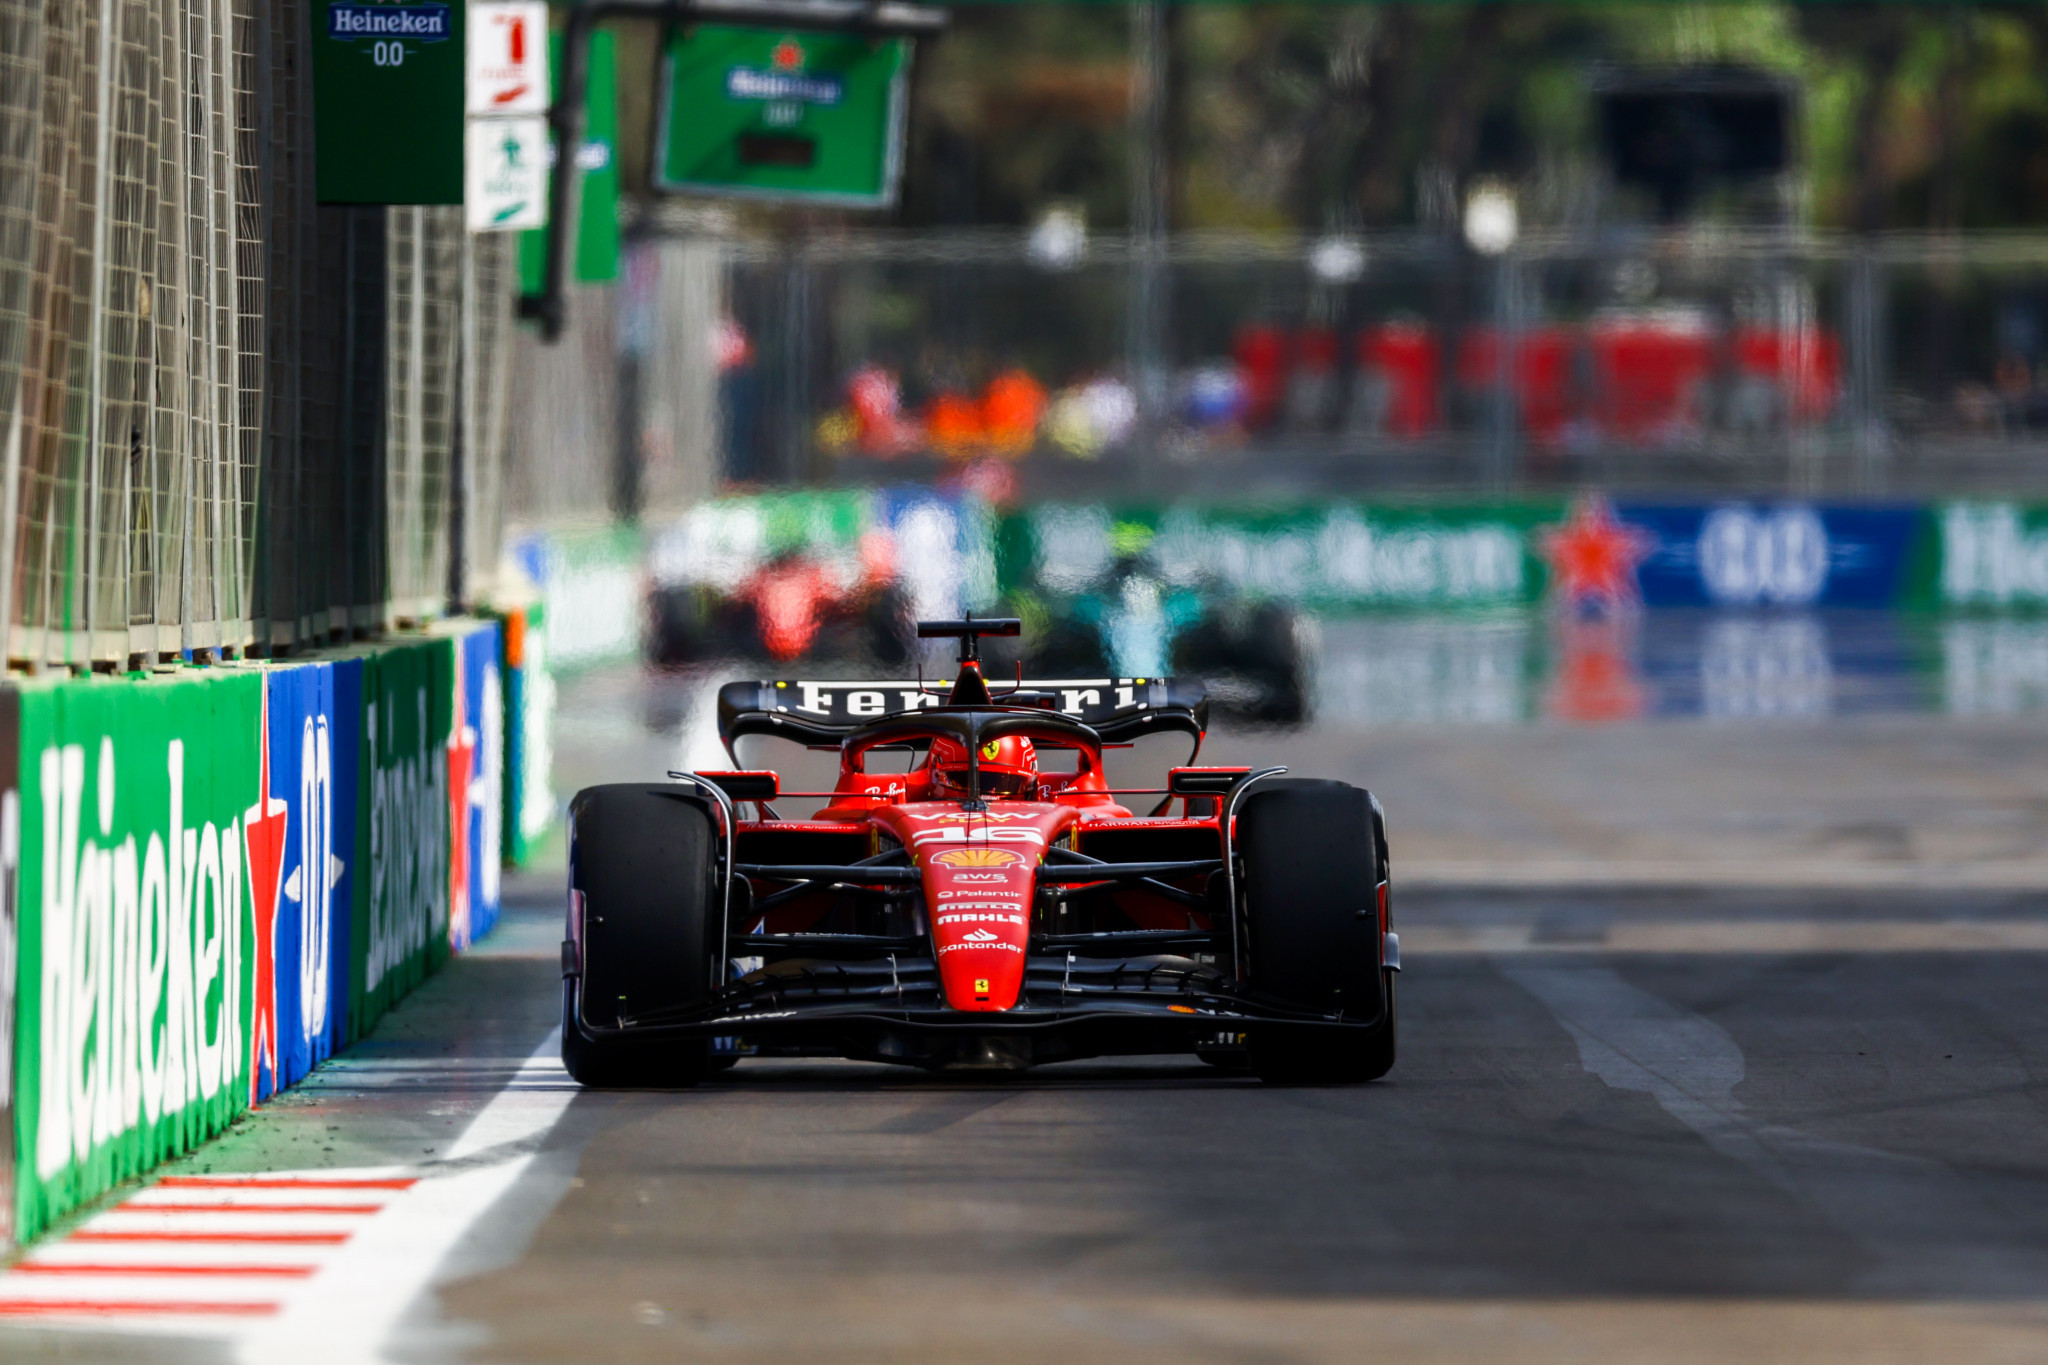 Despite starting in pole position, Ferrari's Charles Leclerc had to settle with a third-place finish as he was 21.270 off the pace ©Getty Images